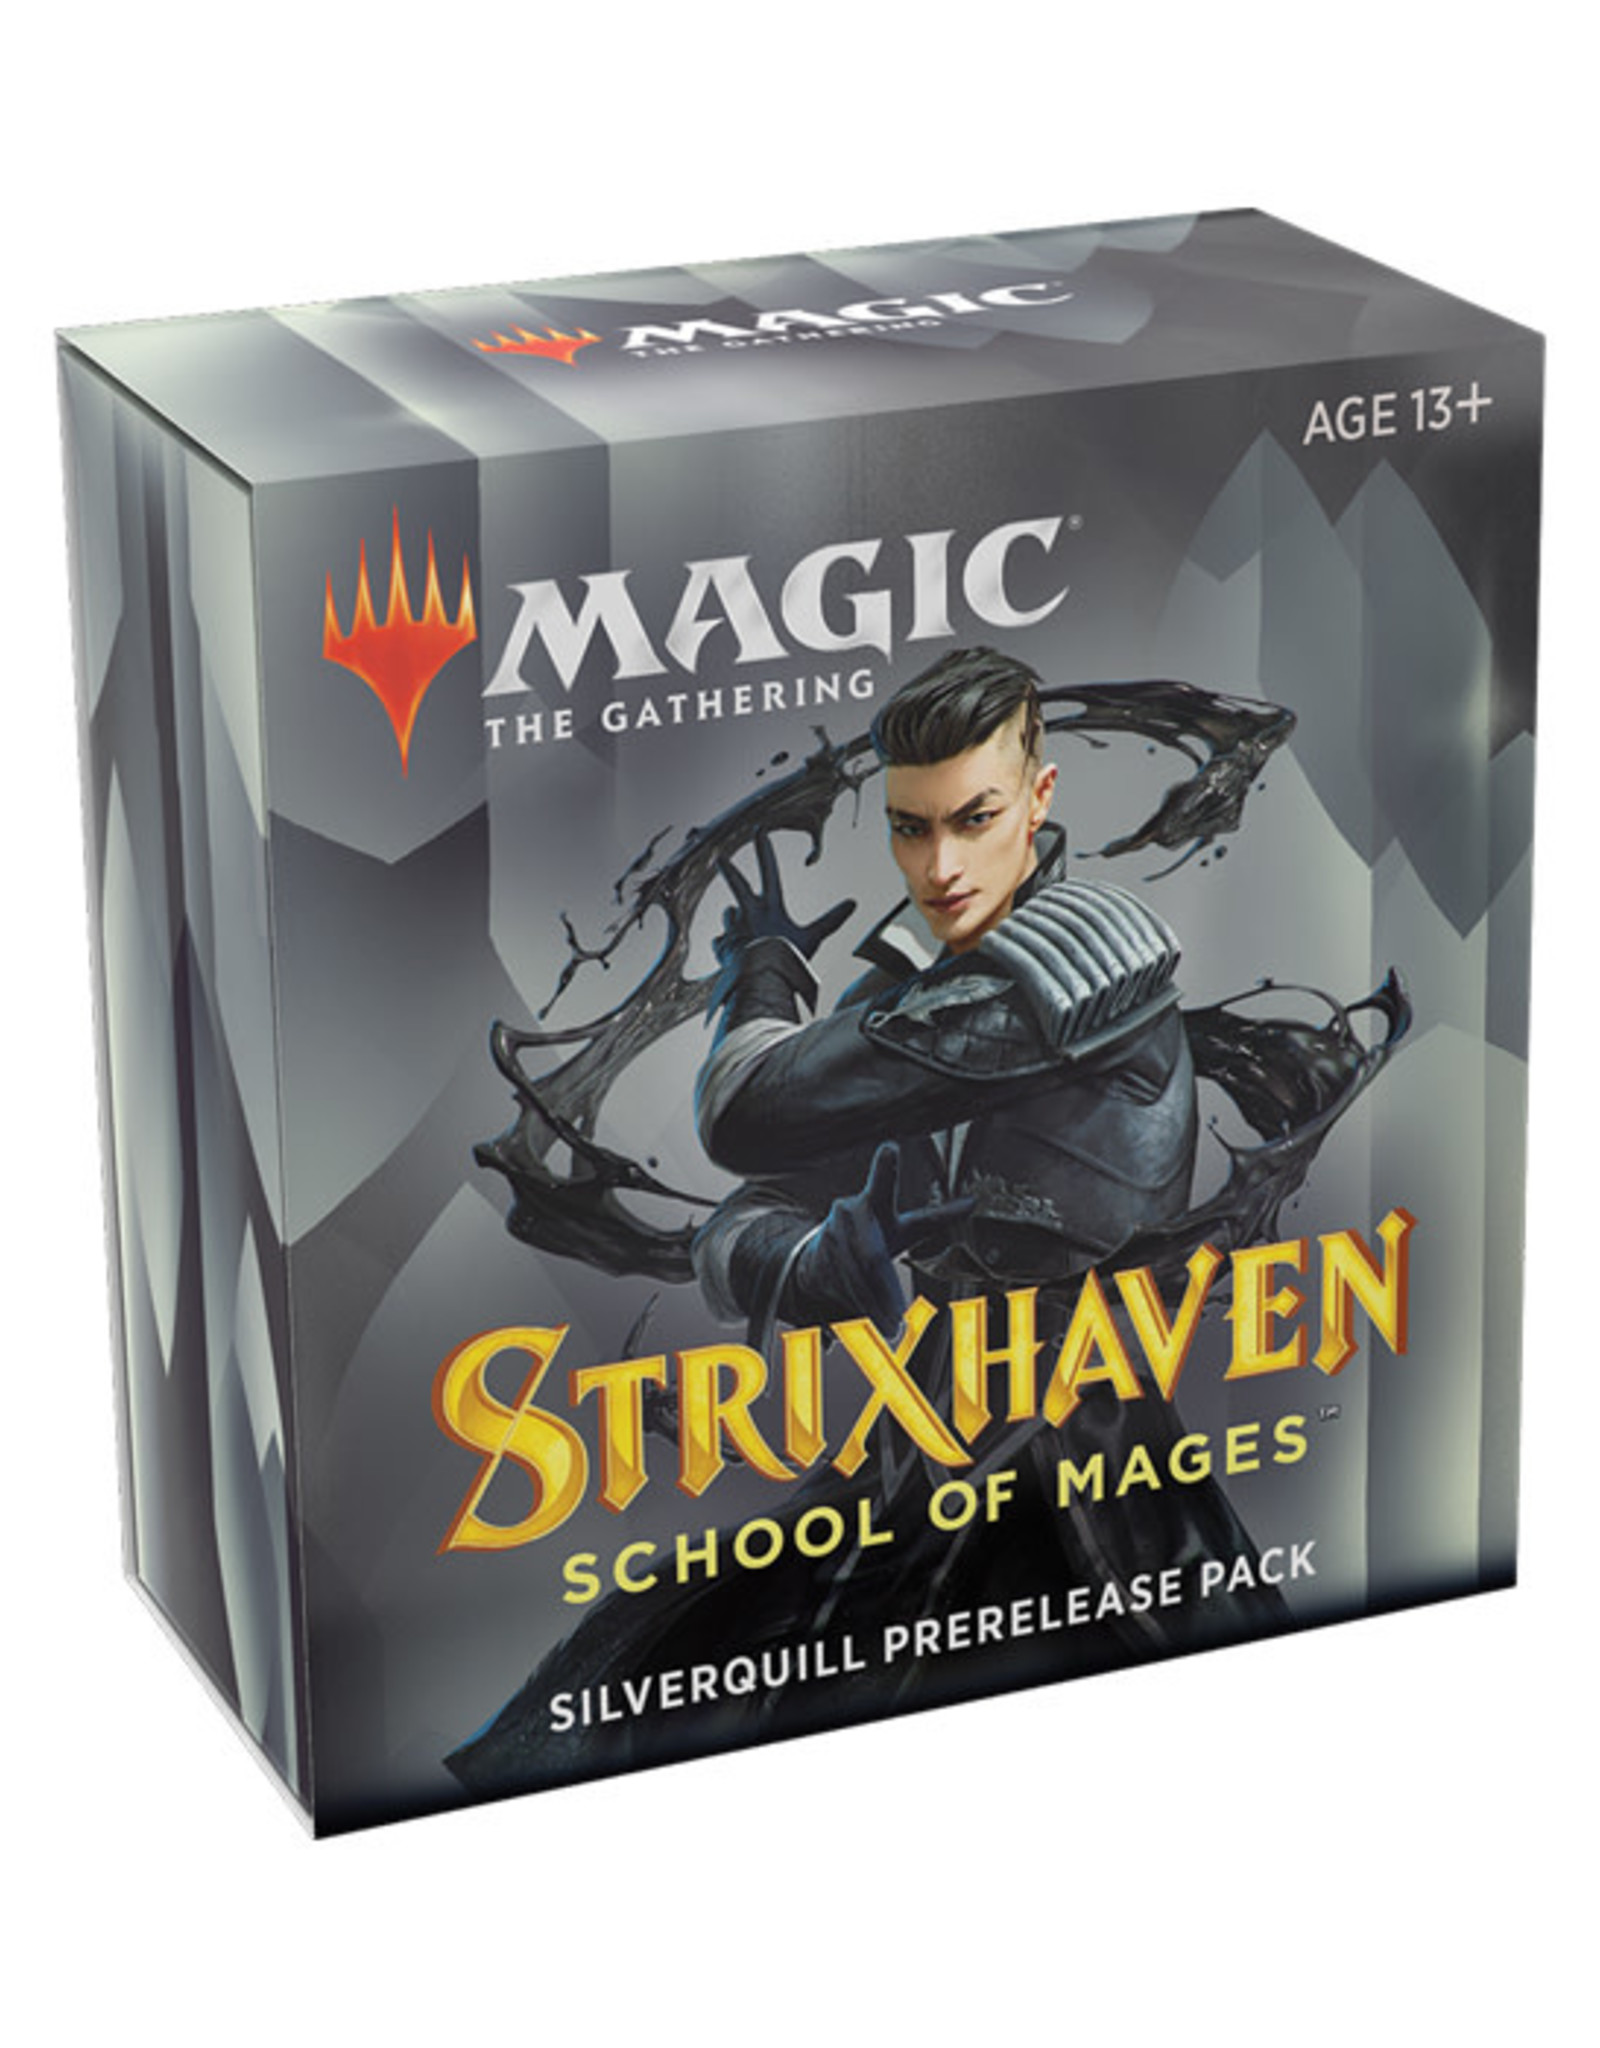 Magic: The Gathering Magic: The Gathering - Strixhaven - Prerelease Pack - Silverquill